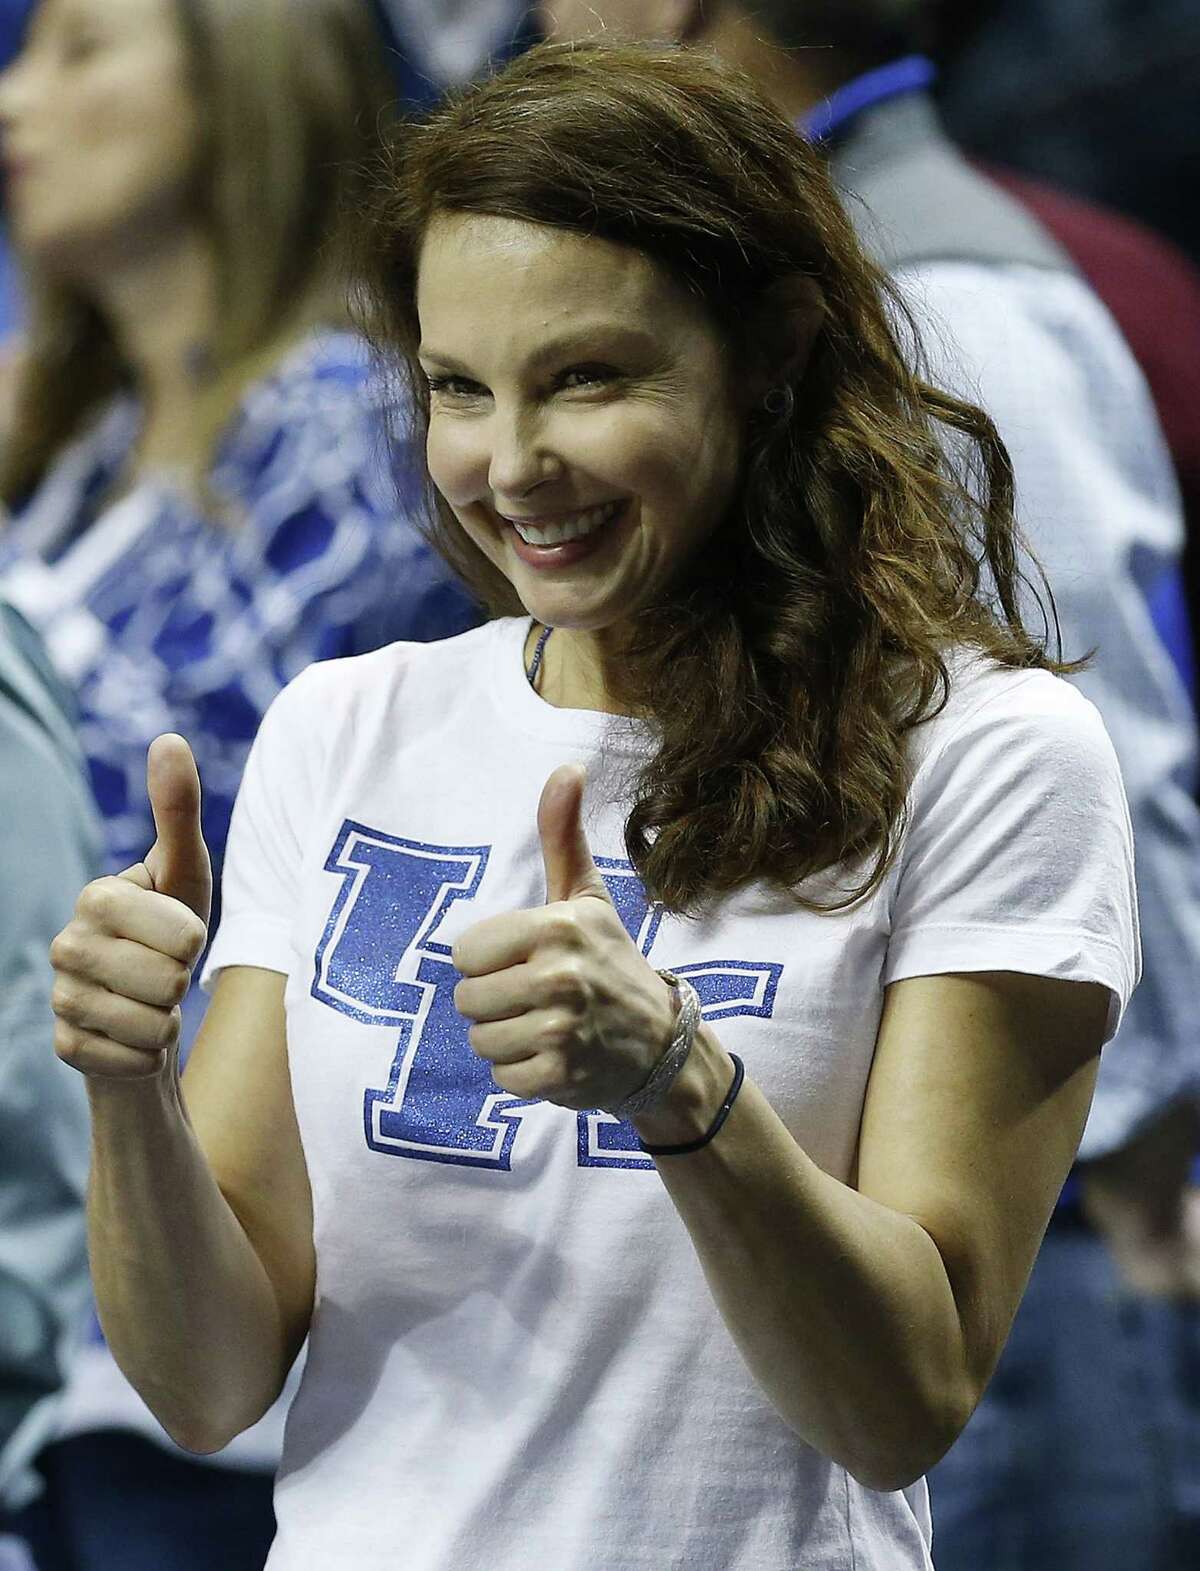 FILE - In this Sunday, March 15, 2015 file photo, actress Ashley Judd motions toward the Kentucky bench before the first half of the NCAA college basketball Southeastern Conference tournament championship game between Kentucky and Arkansas, in Nashville, Tenn. The Kentucky Wildcats fan Judd is firing back at those who posted threats and hateful comments online after she tweeted that she thought Arkansas was playing dirty in its SEC basketball matchup with her alma mater. In an online essay posted Thursday, March 19, 2015, on mic.com, Judd says she routinely copes with tweets that ìsexualize, objectify, insult, degrade and even physically threaten me.î (AP Photo/Steve Helber, File)